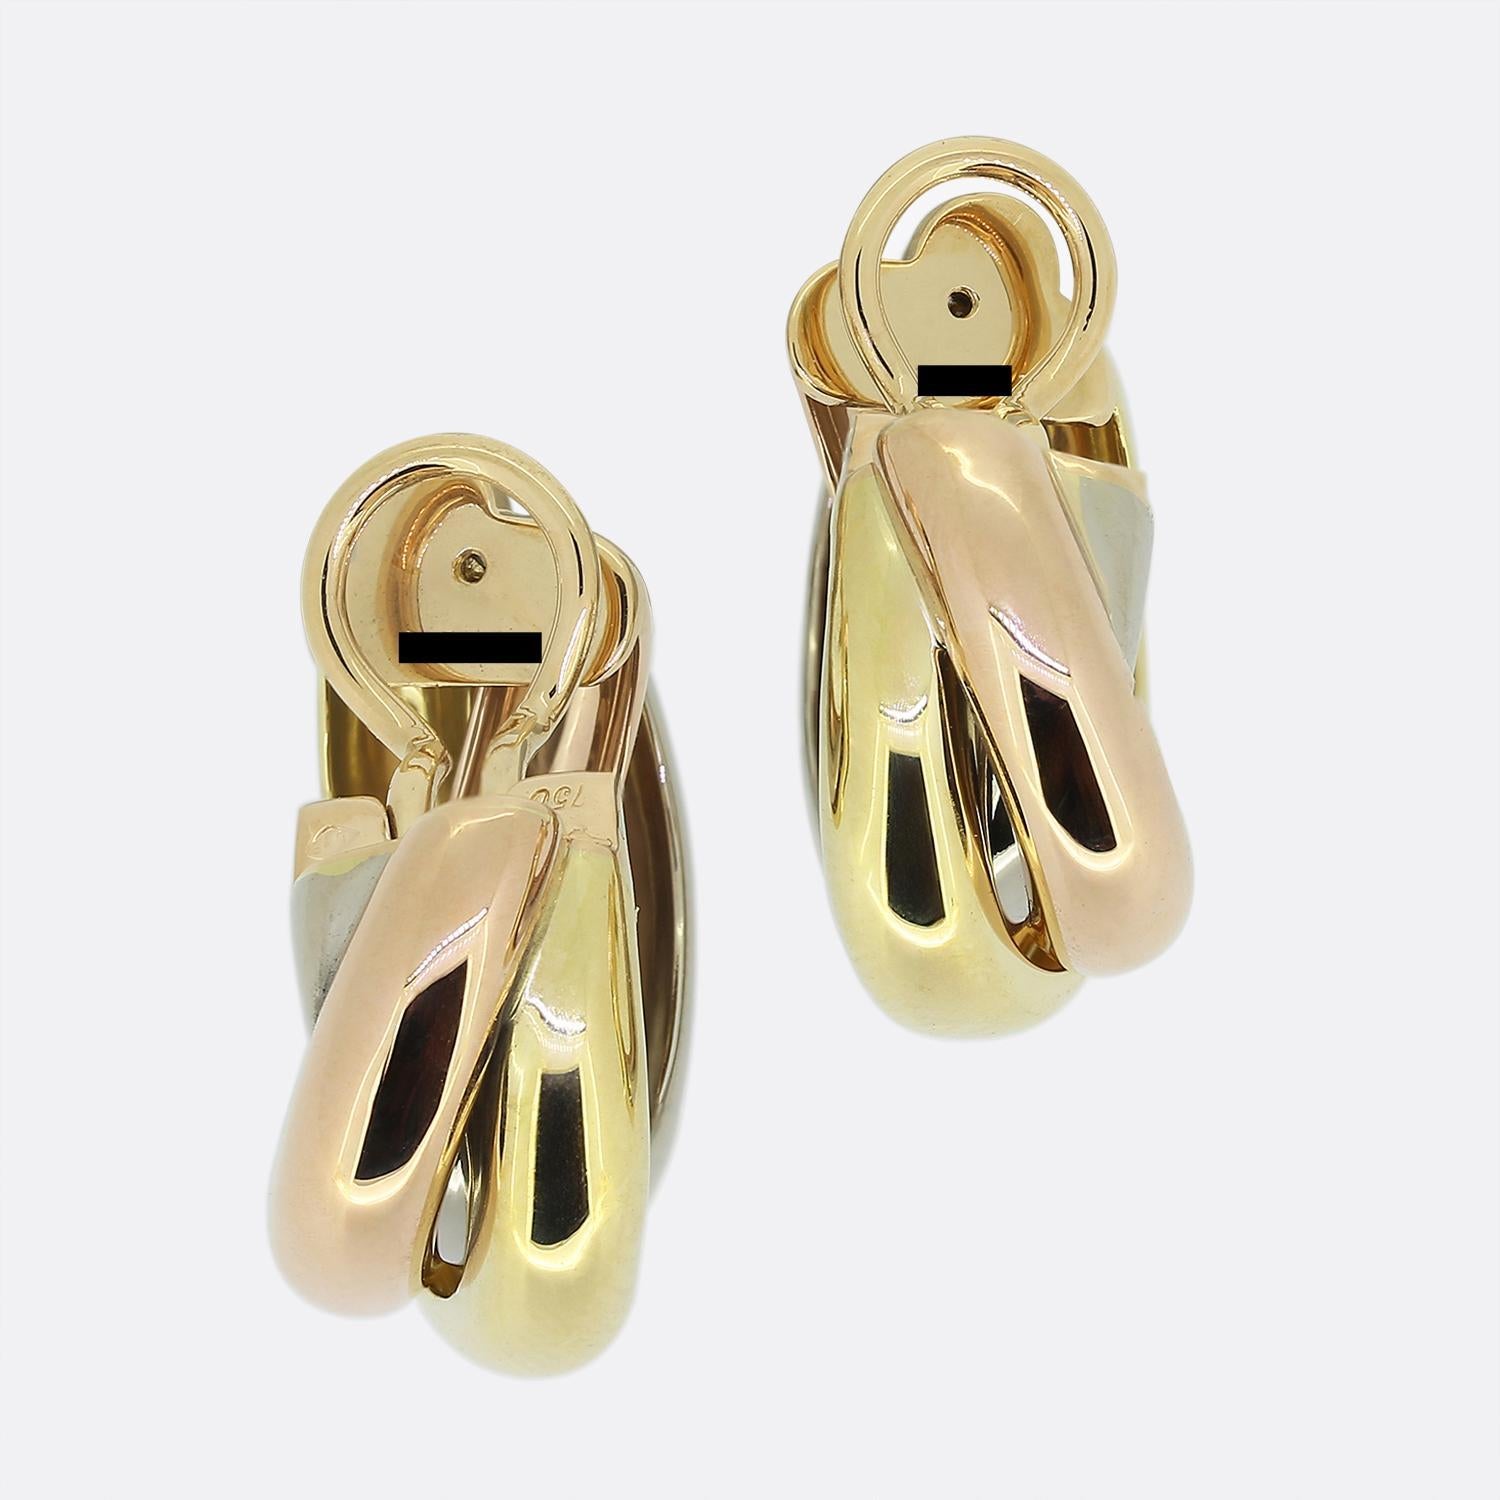 Here we have an iconic pair of hooped earrings from the luxury jewellery house of Cartier. Each earring is comprised of three contrasting 18ct gold bars which are intertwined with one another whilst showcasing a plain polished finish.